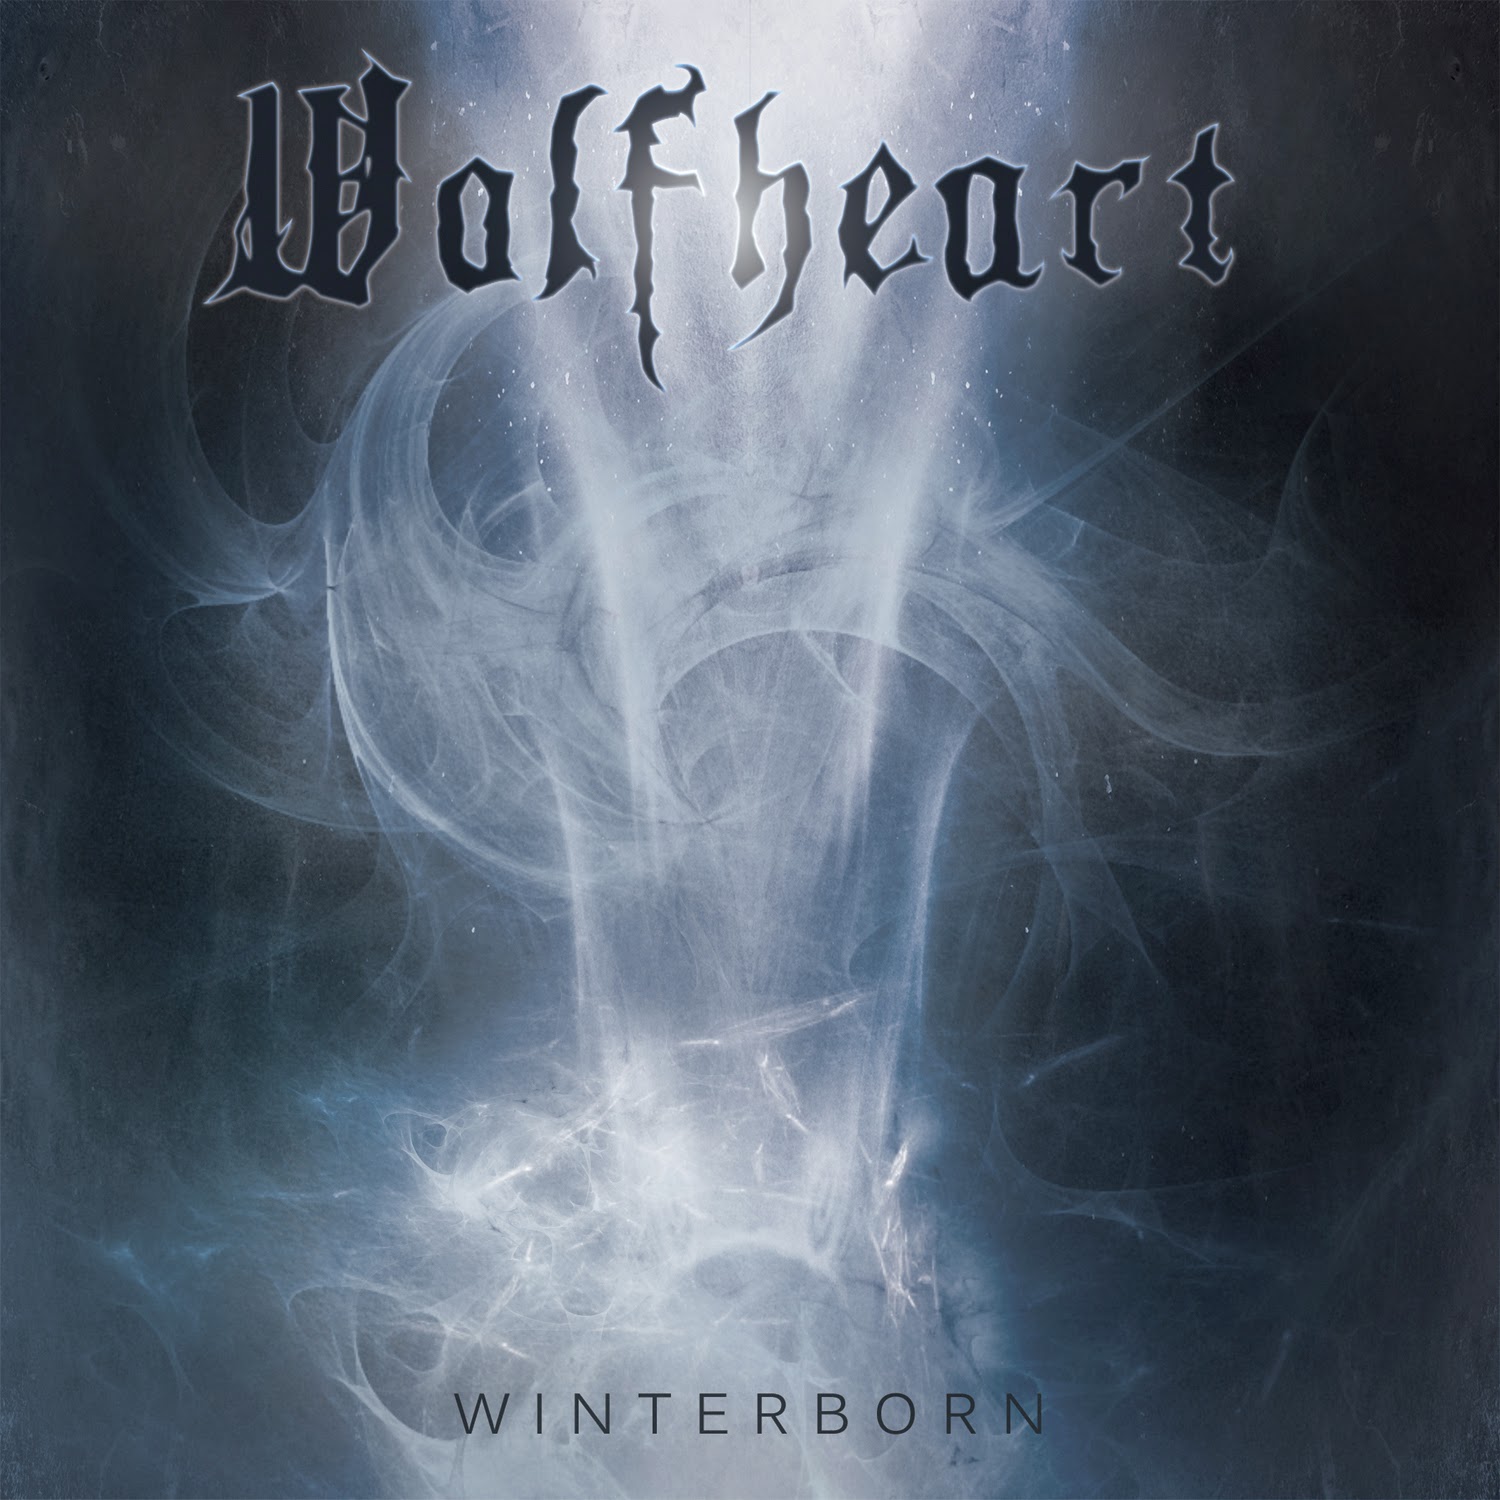 Wolfheart - Winterborn - Cover